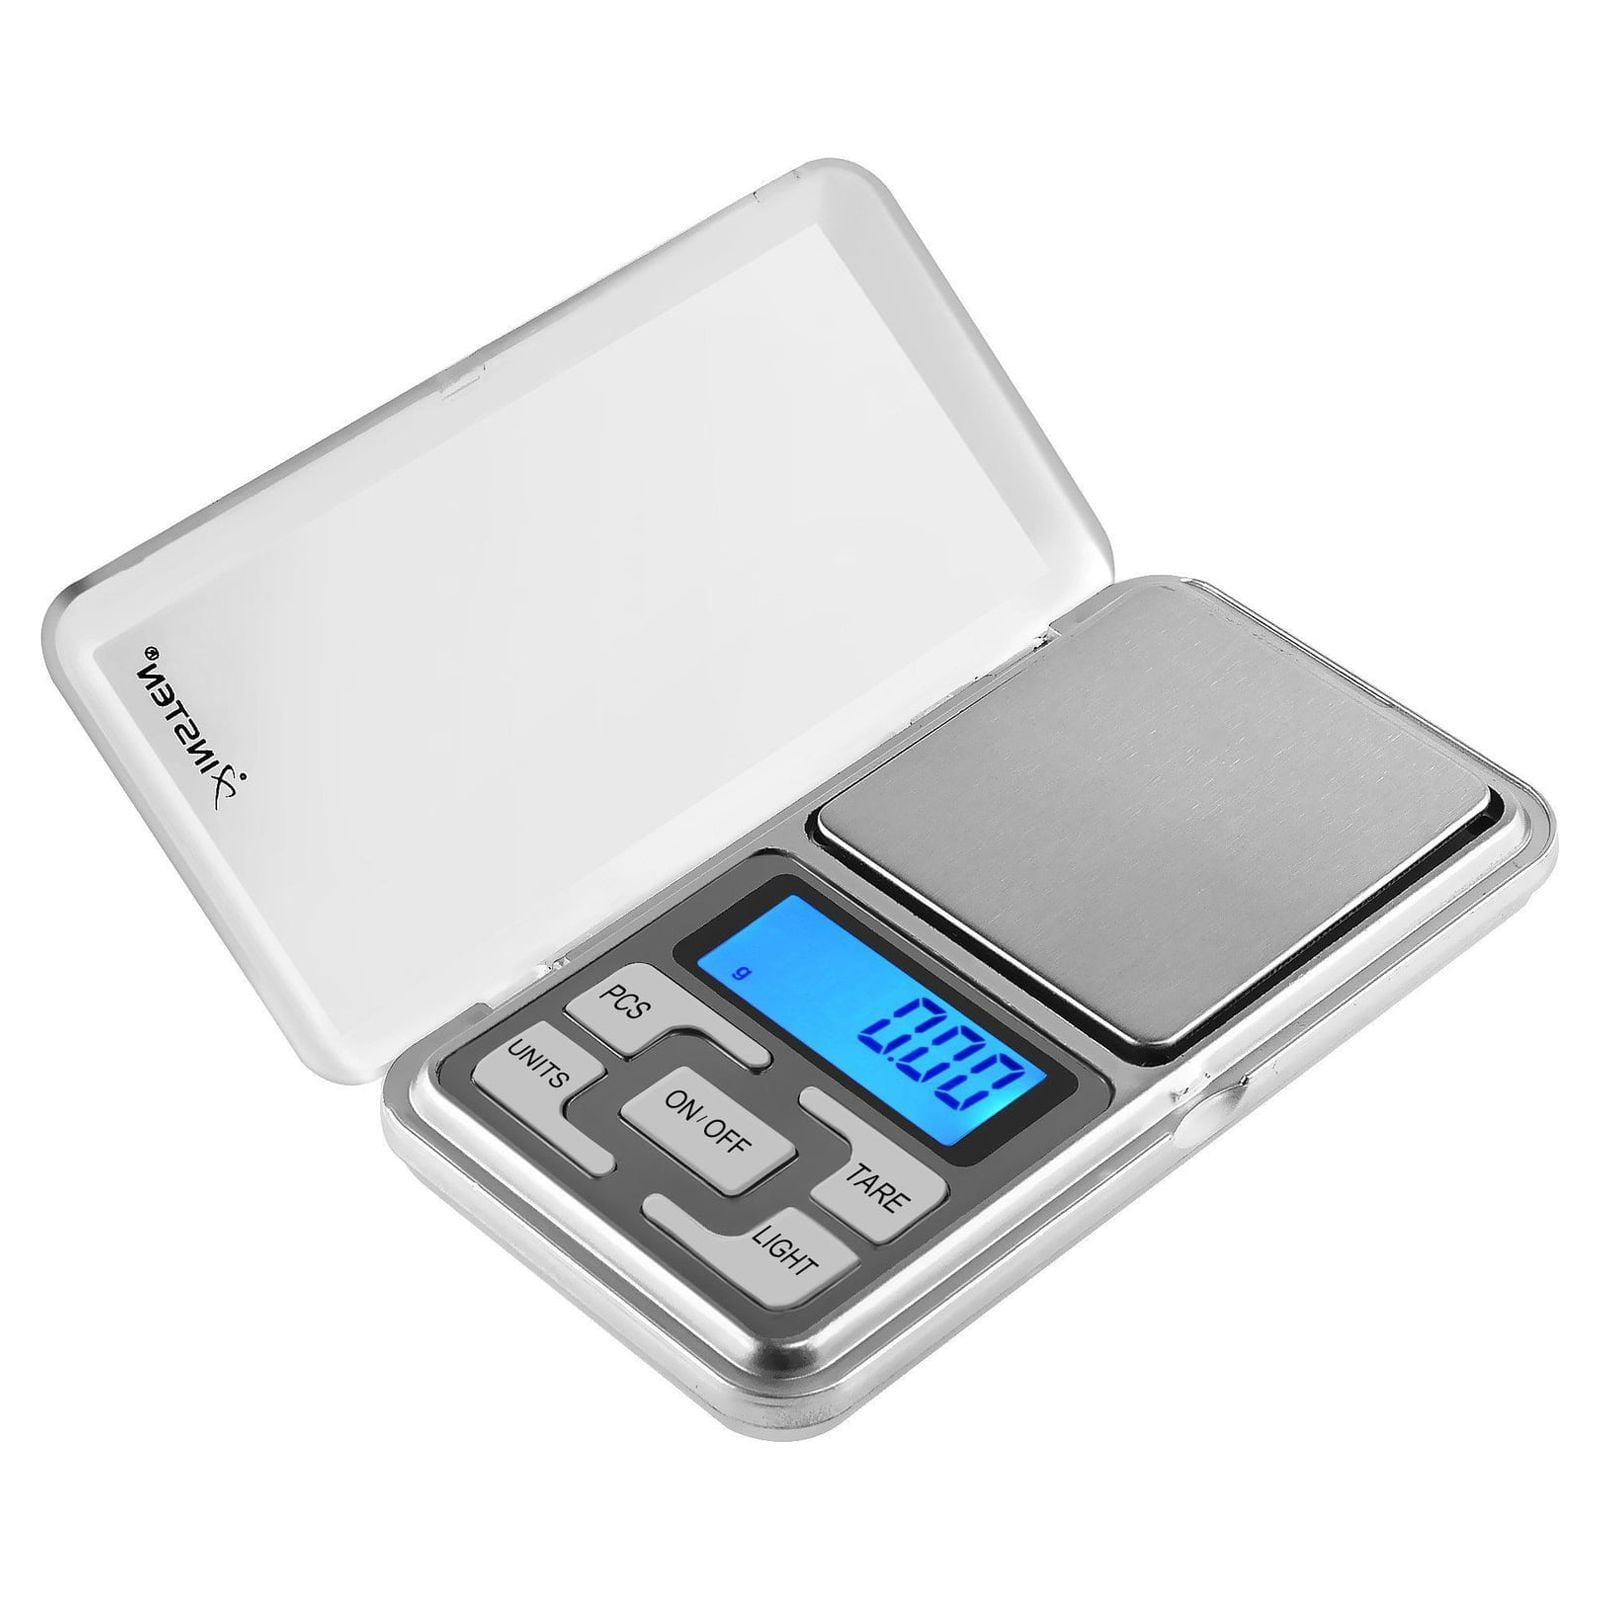 Small Gram Scale, Digital Kitchen Food Scale for Food Ounces and Grams,  500g by 0.01g Accurate, MEIYA Multifunction Digital Scale for  Jewelry/Baking